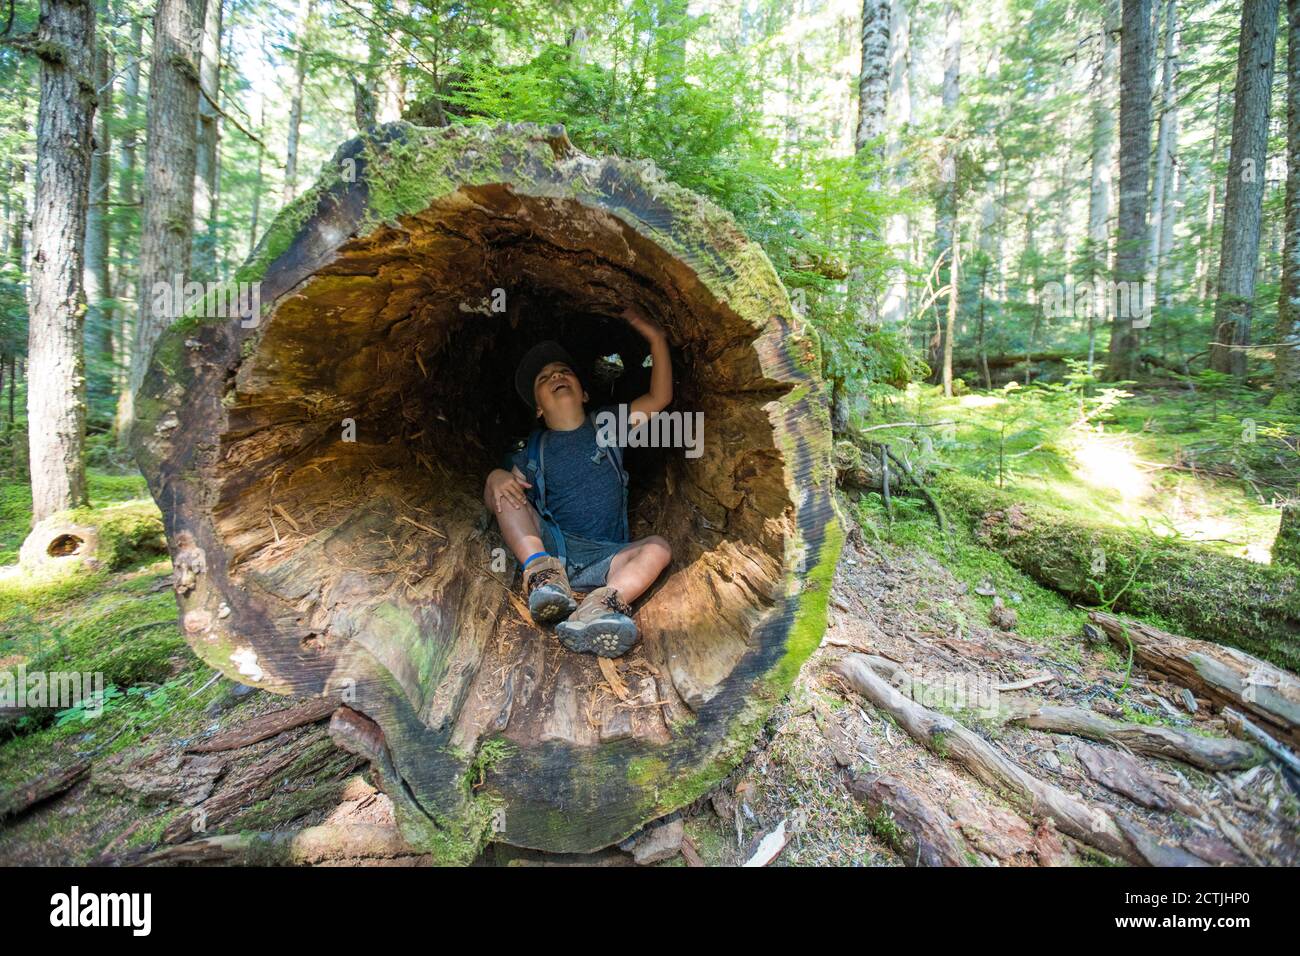 Boy sitting inside discovering and exploring old growth tree, Stock Photo